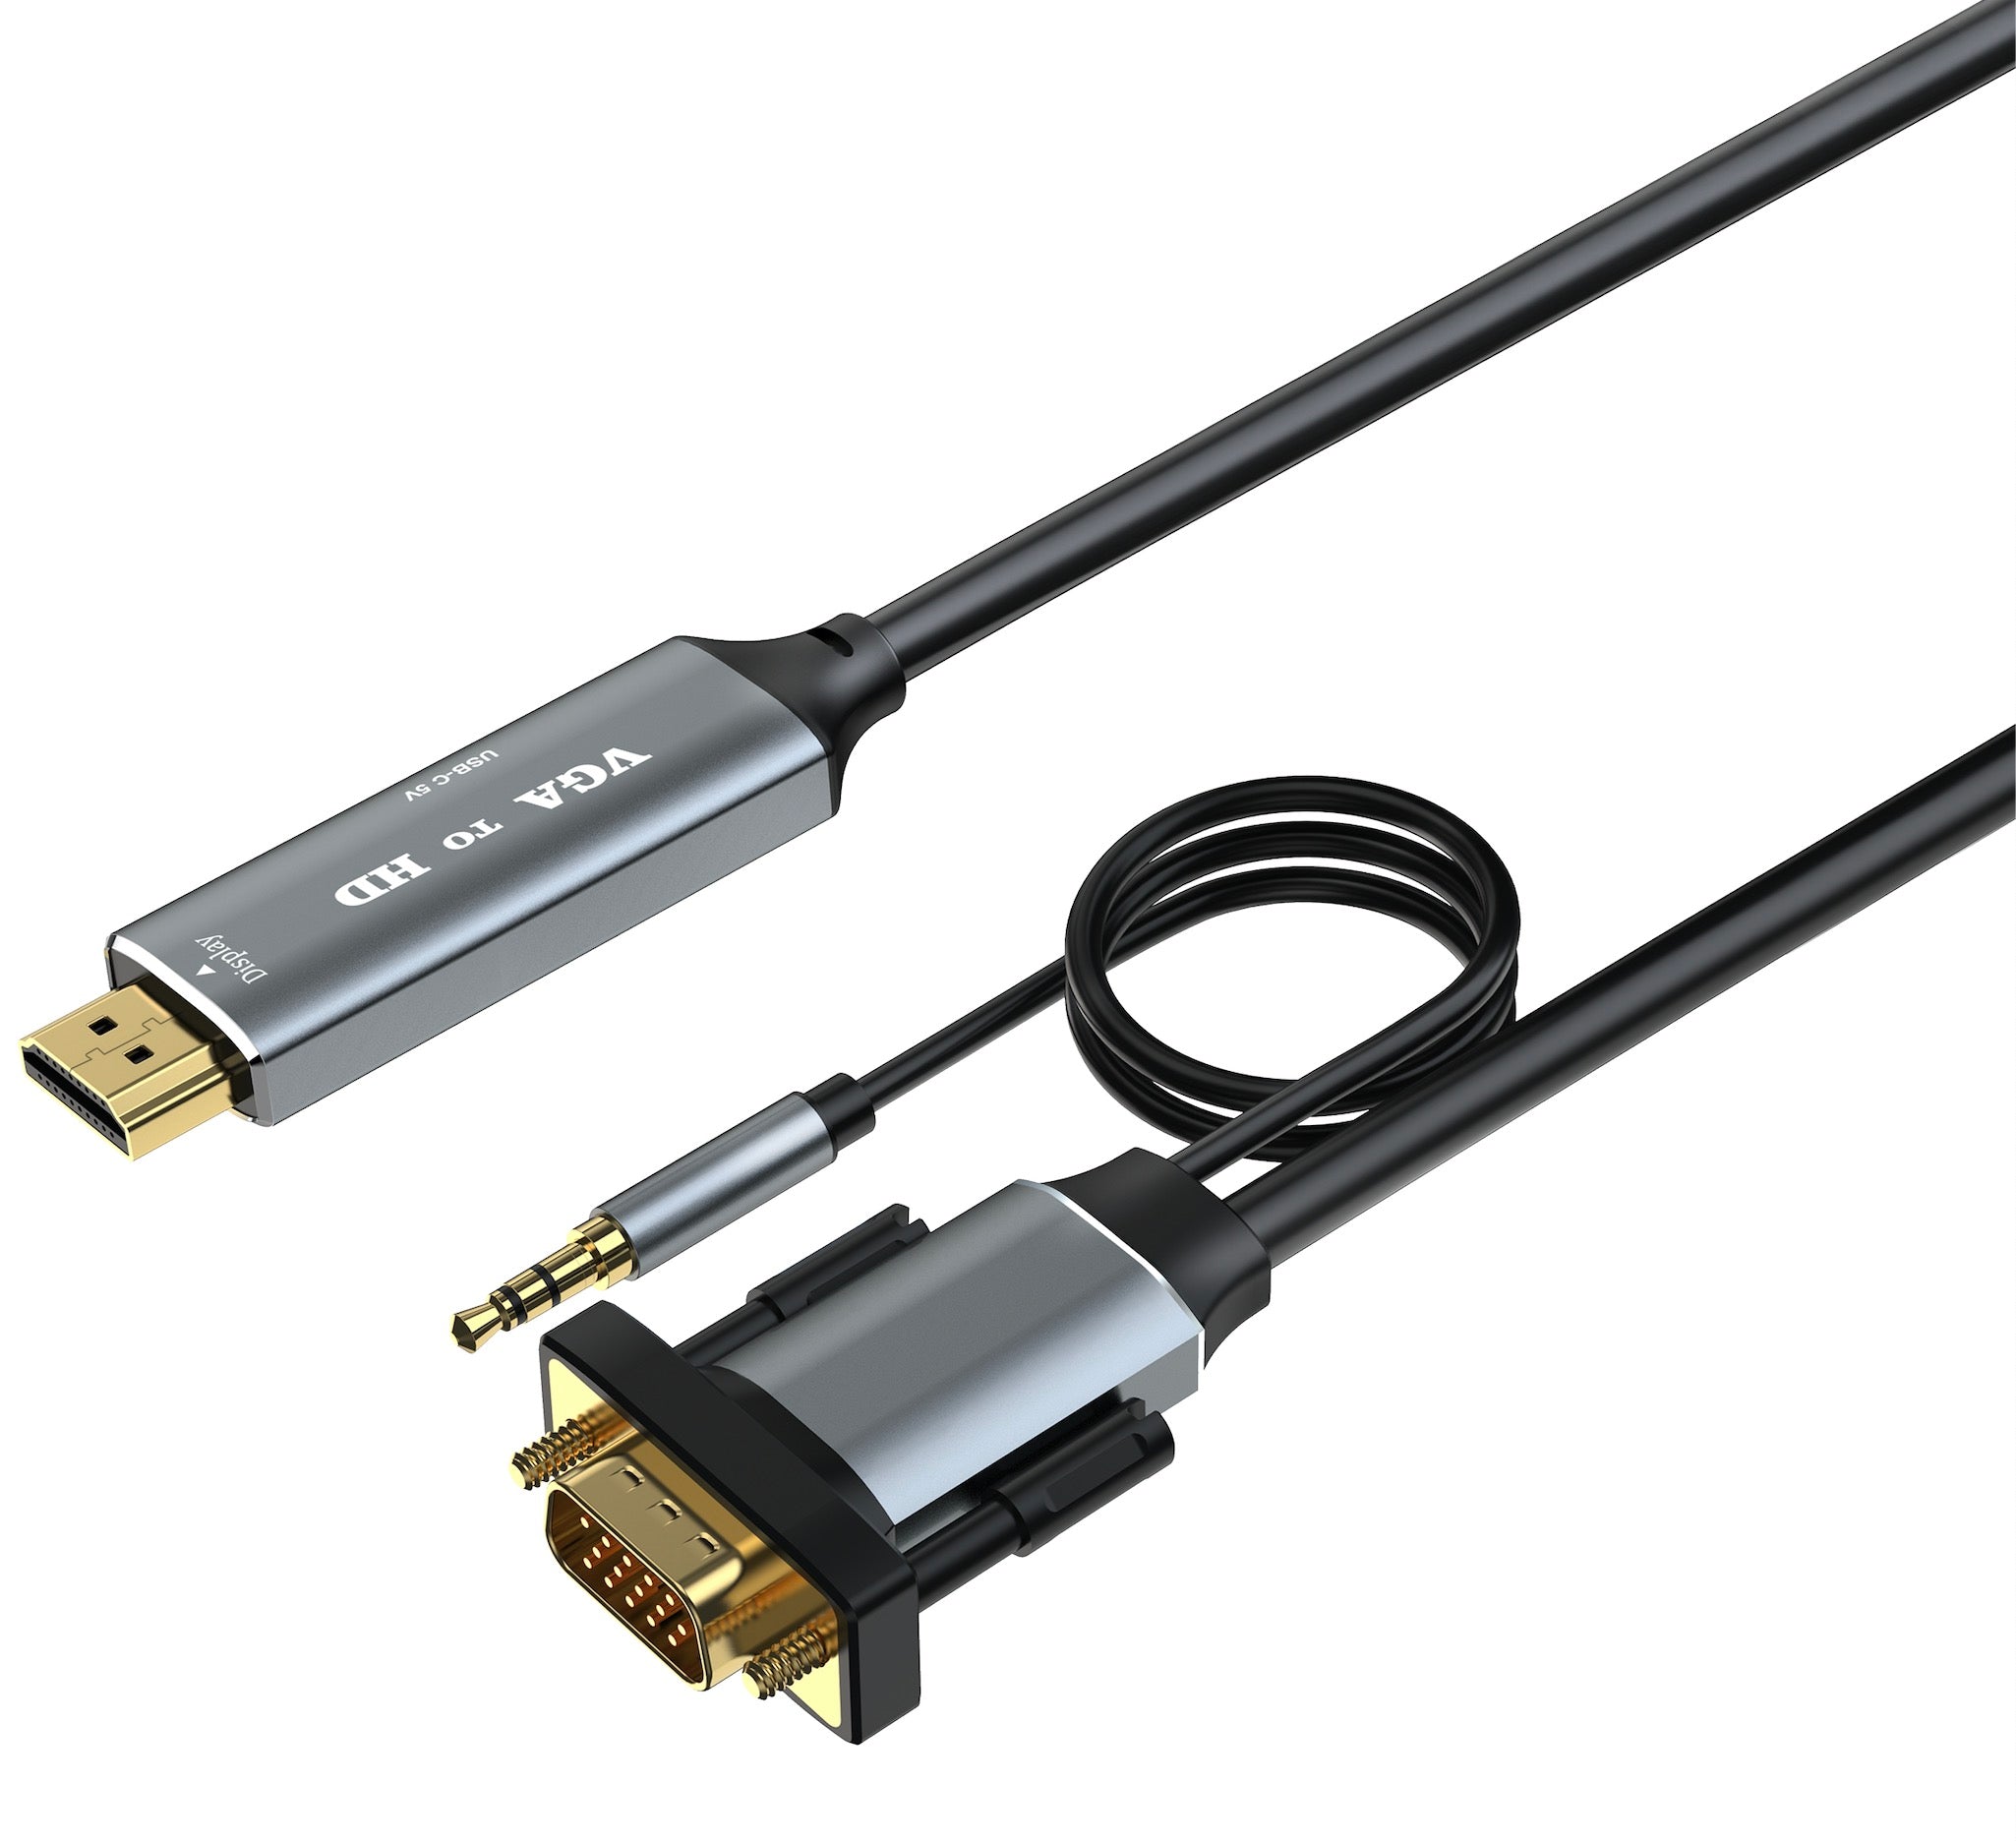 VGA to HDMI ( 3.5mm Audio & USB C Power) Cable 1.8m